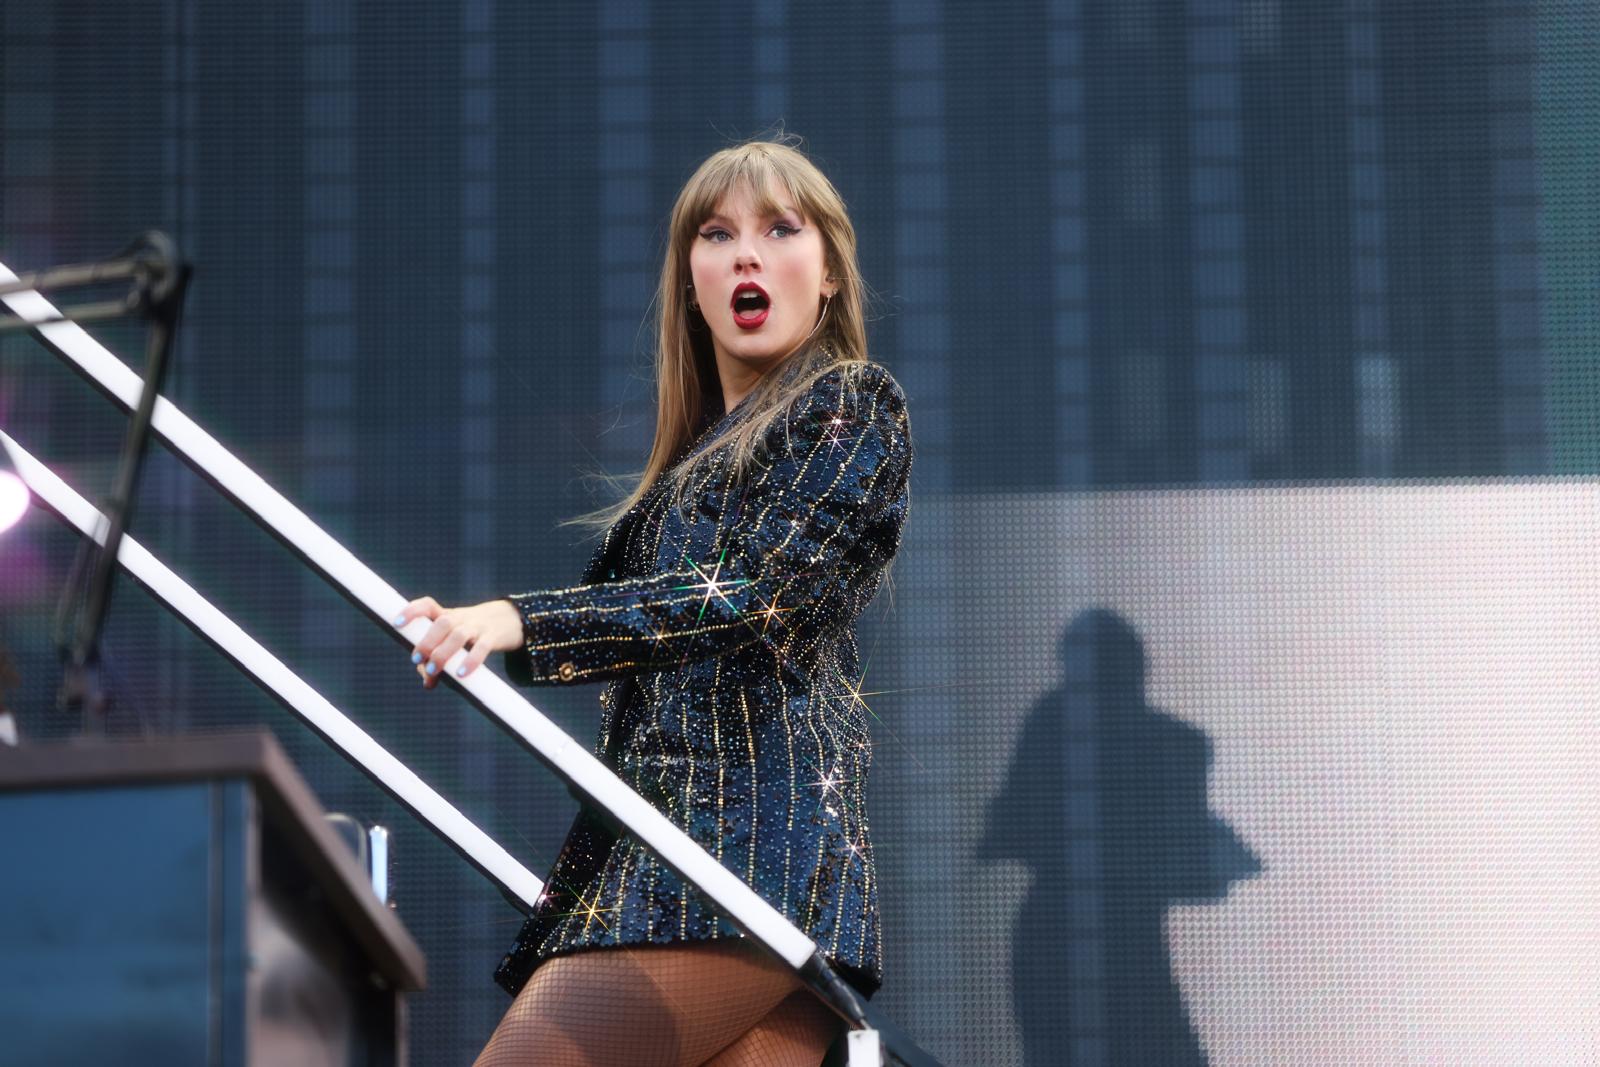 Taylor Swift onstage at Murrayfield Stadium in Edinburgh during the first UK date of her record-breaking Eras Tour